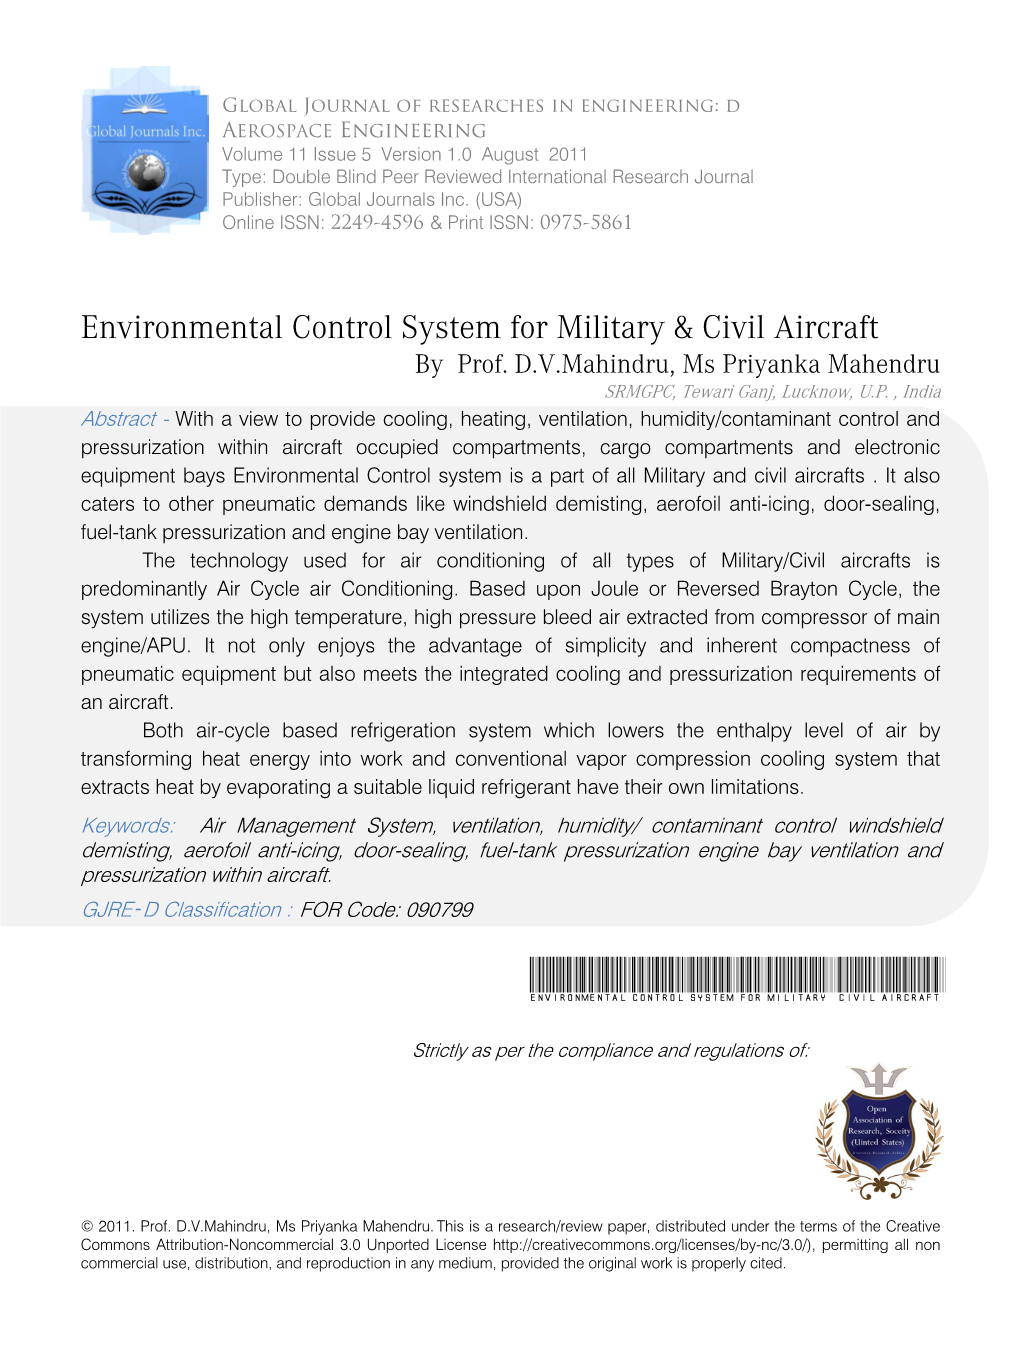 Environmental Control System for Military & Civil Aircraft